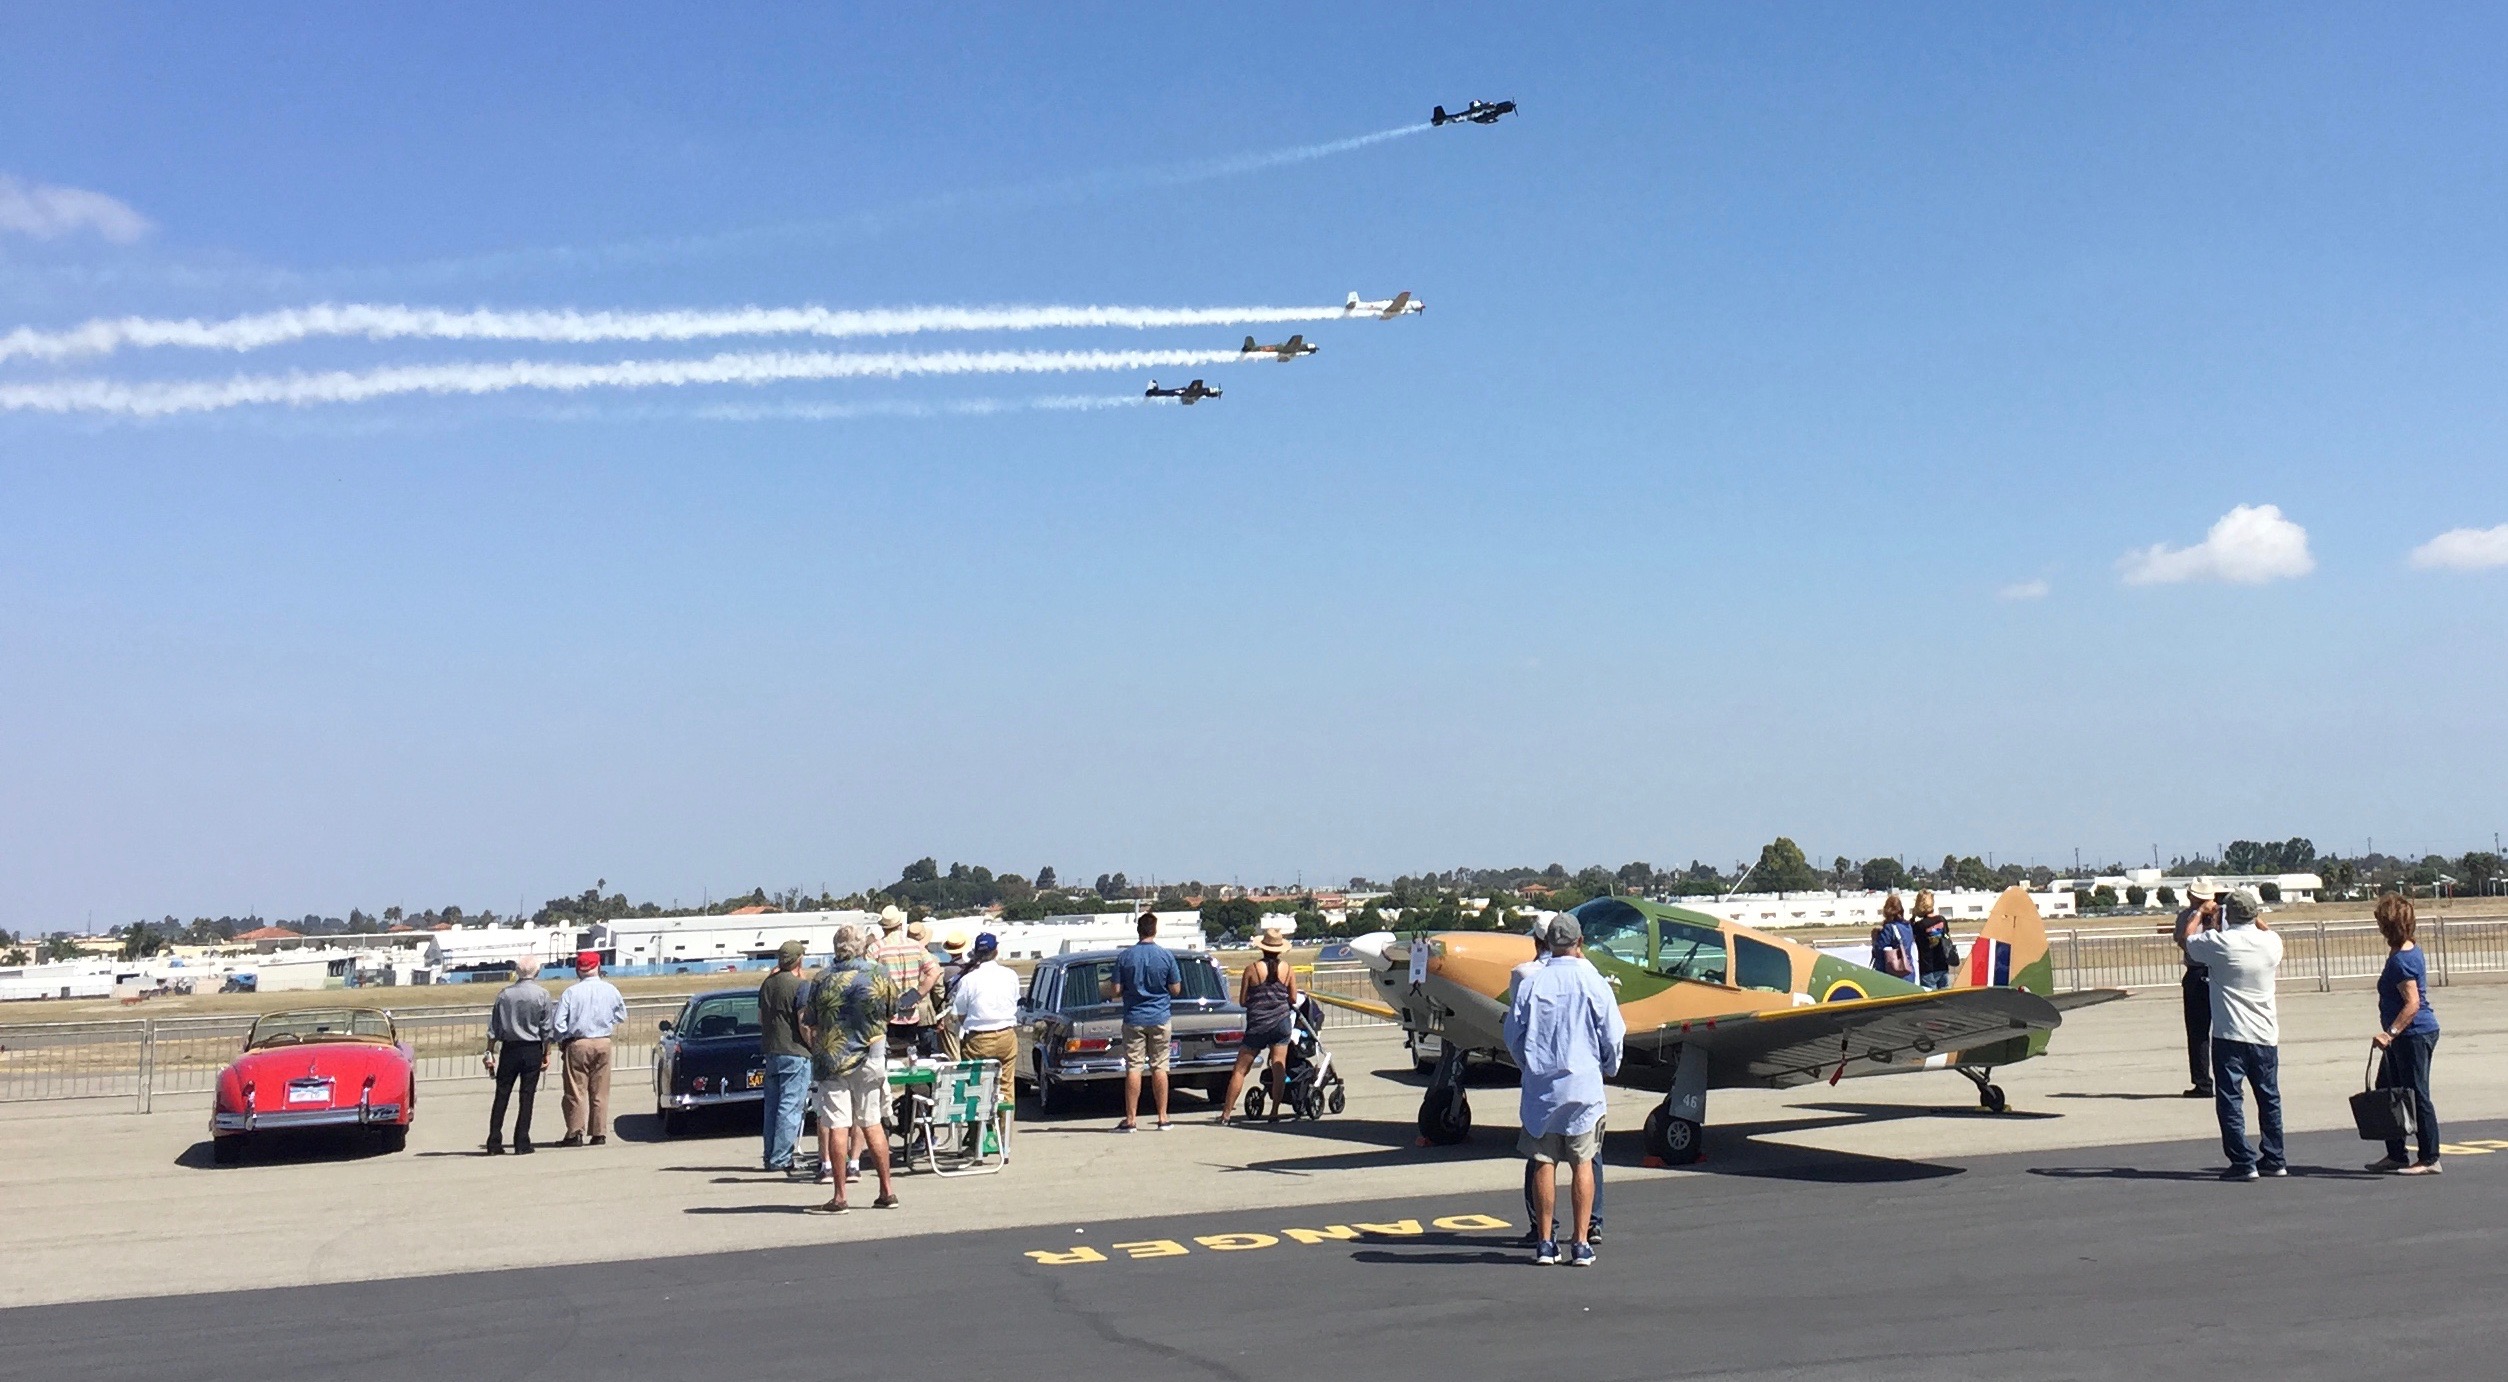 , Palos Verdes concours flies to new heights at airport location, ClassicCars.com Journal